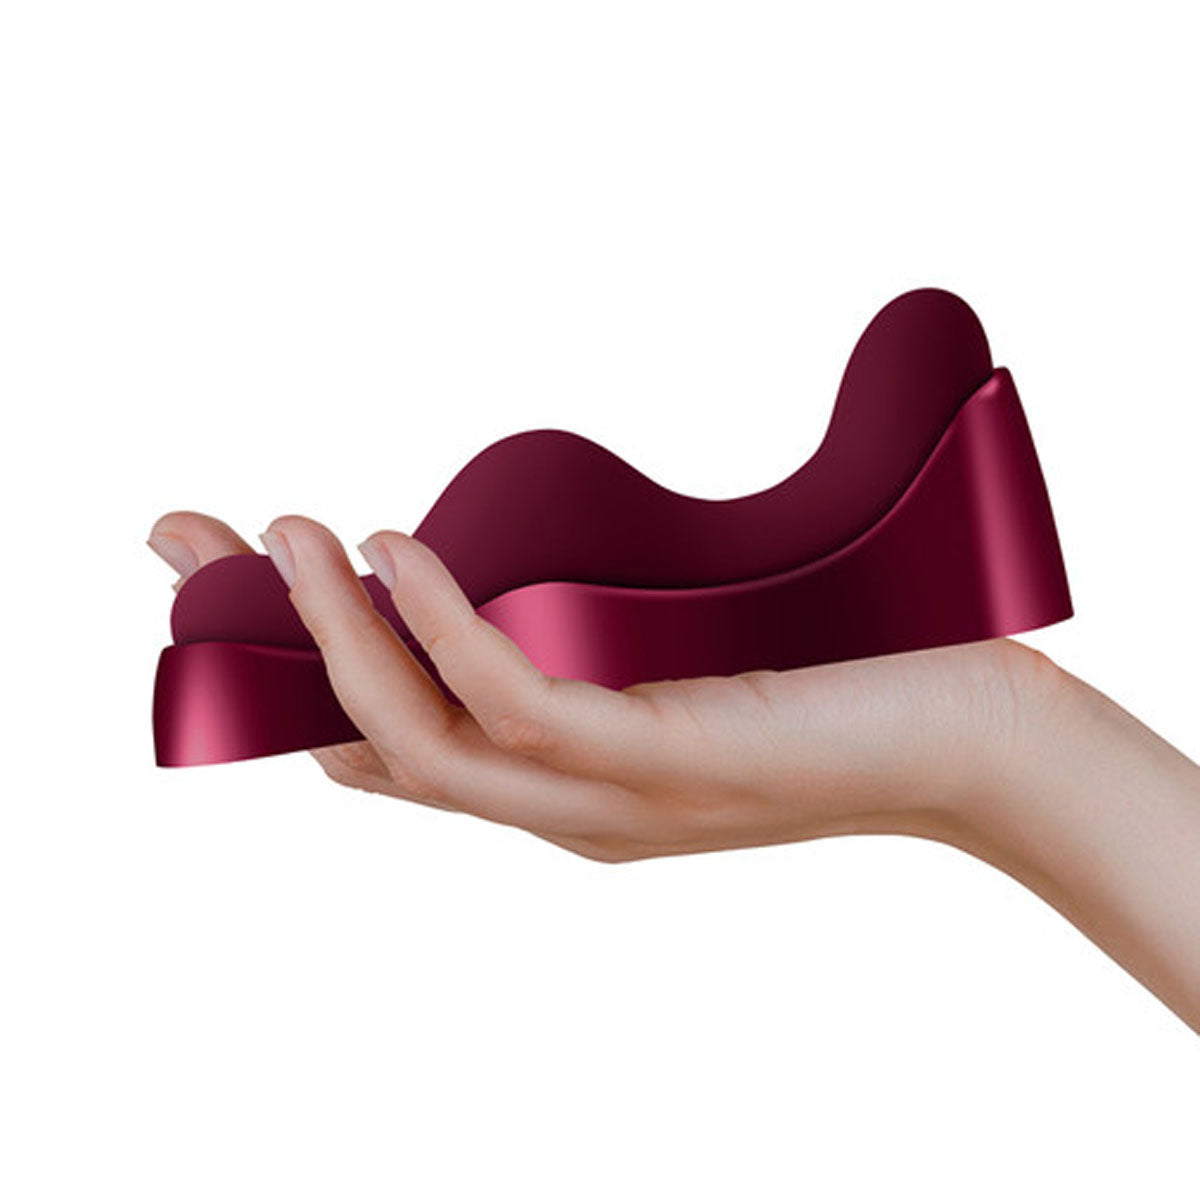 Hand holding a burgundy wavy silicone vibrator on its charging dock Nudie Co